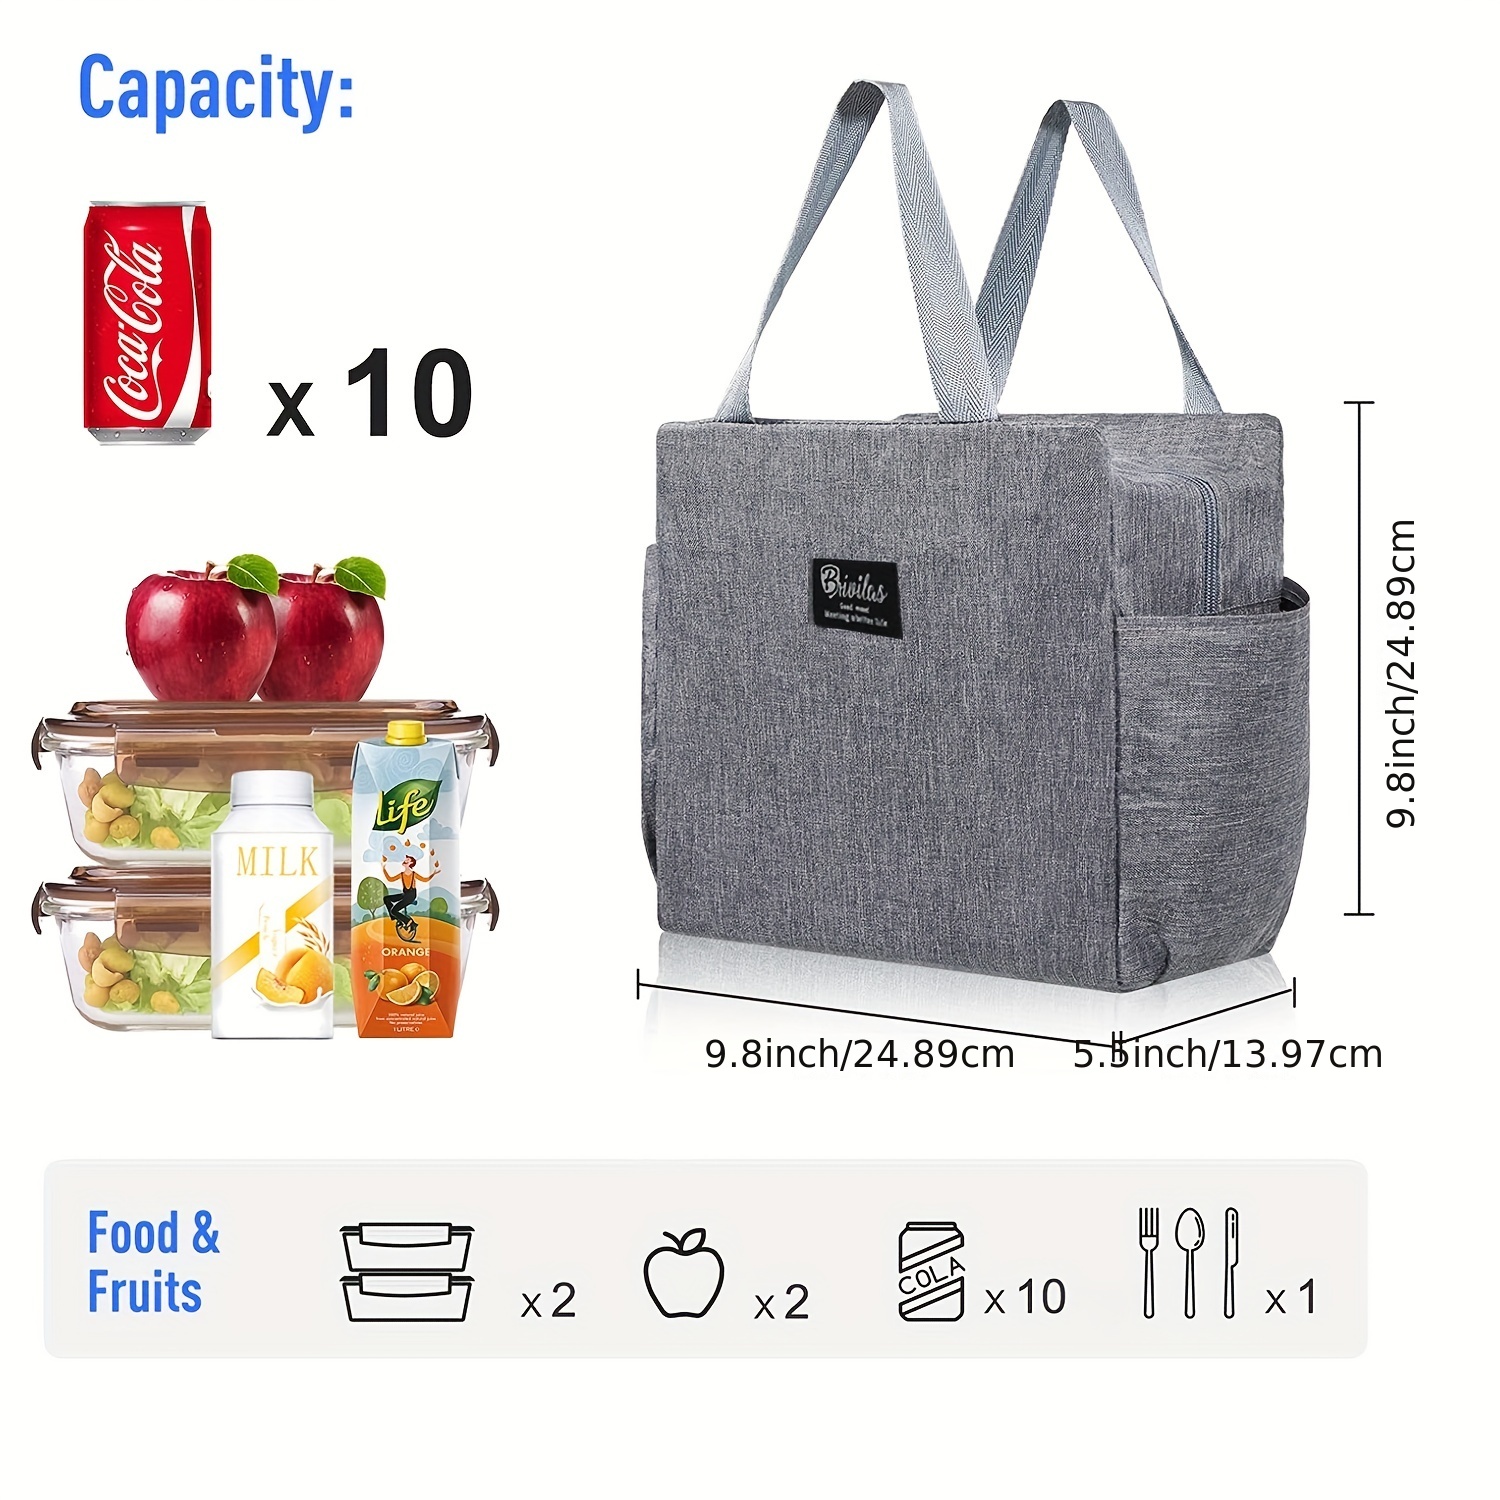 1pc Insulated Lunch Bag - Large Grey Tote With 2 Compartments, Shoulder  Strap, And Leakproof Design - Reusable Thermal Lunch Box For Men, Women,  And A